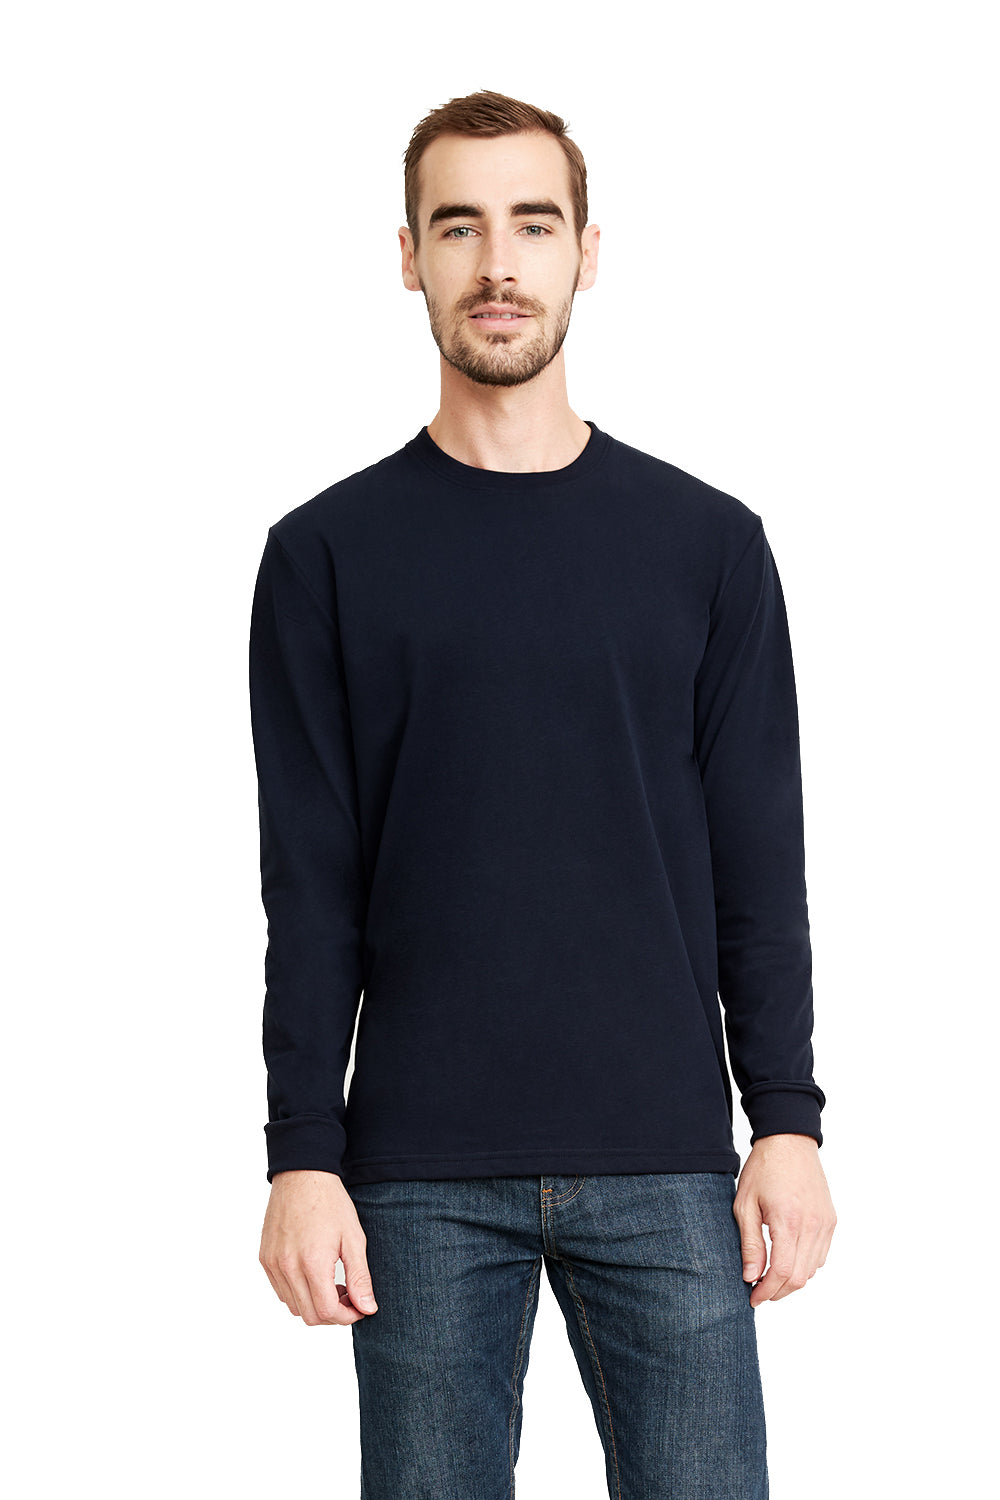 Next Level 6411 Mens Sueded Jersey Long Sleeve Crewneck T-Shirt Navy Blue Front